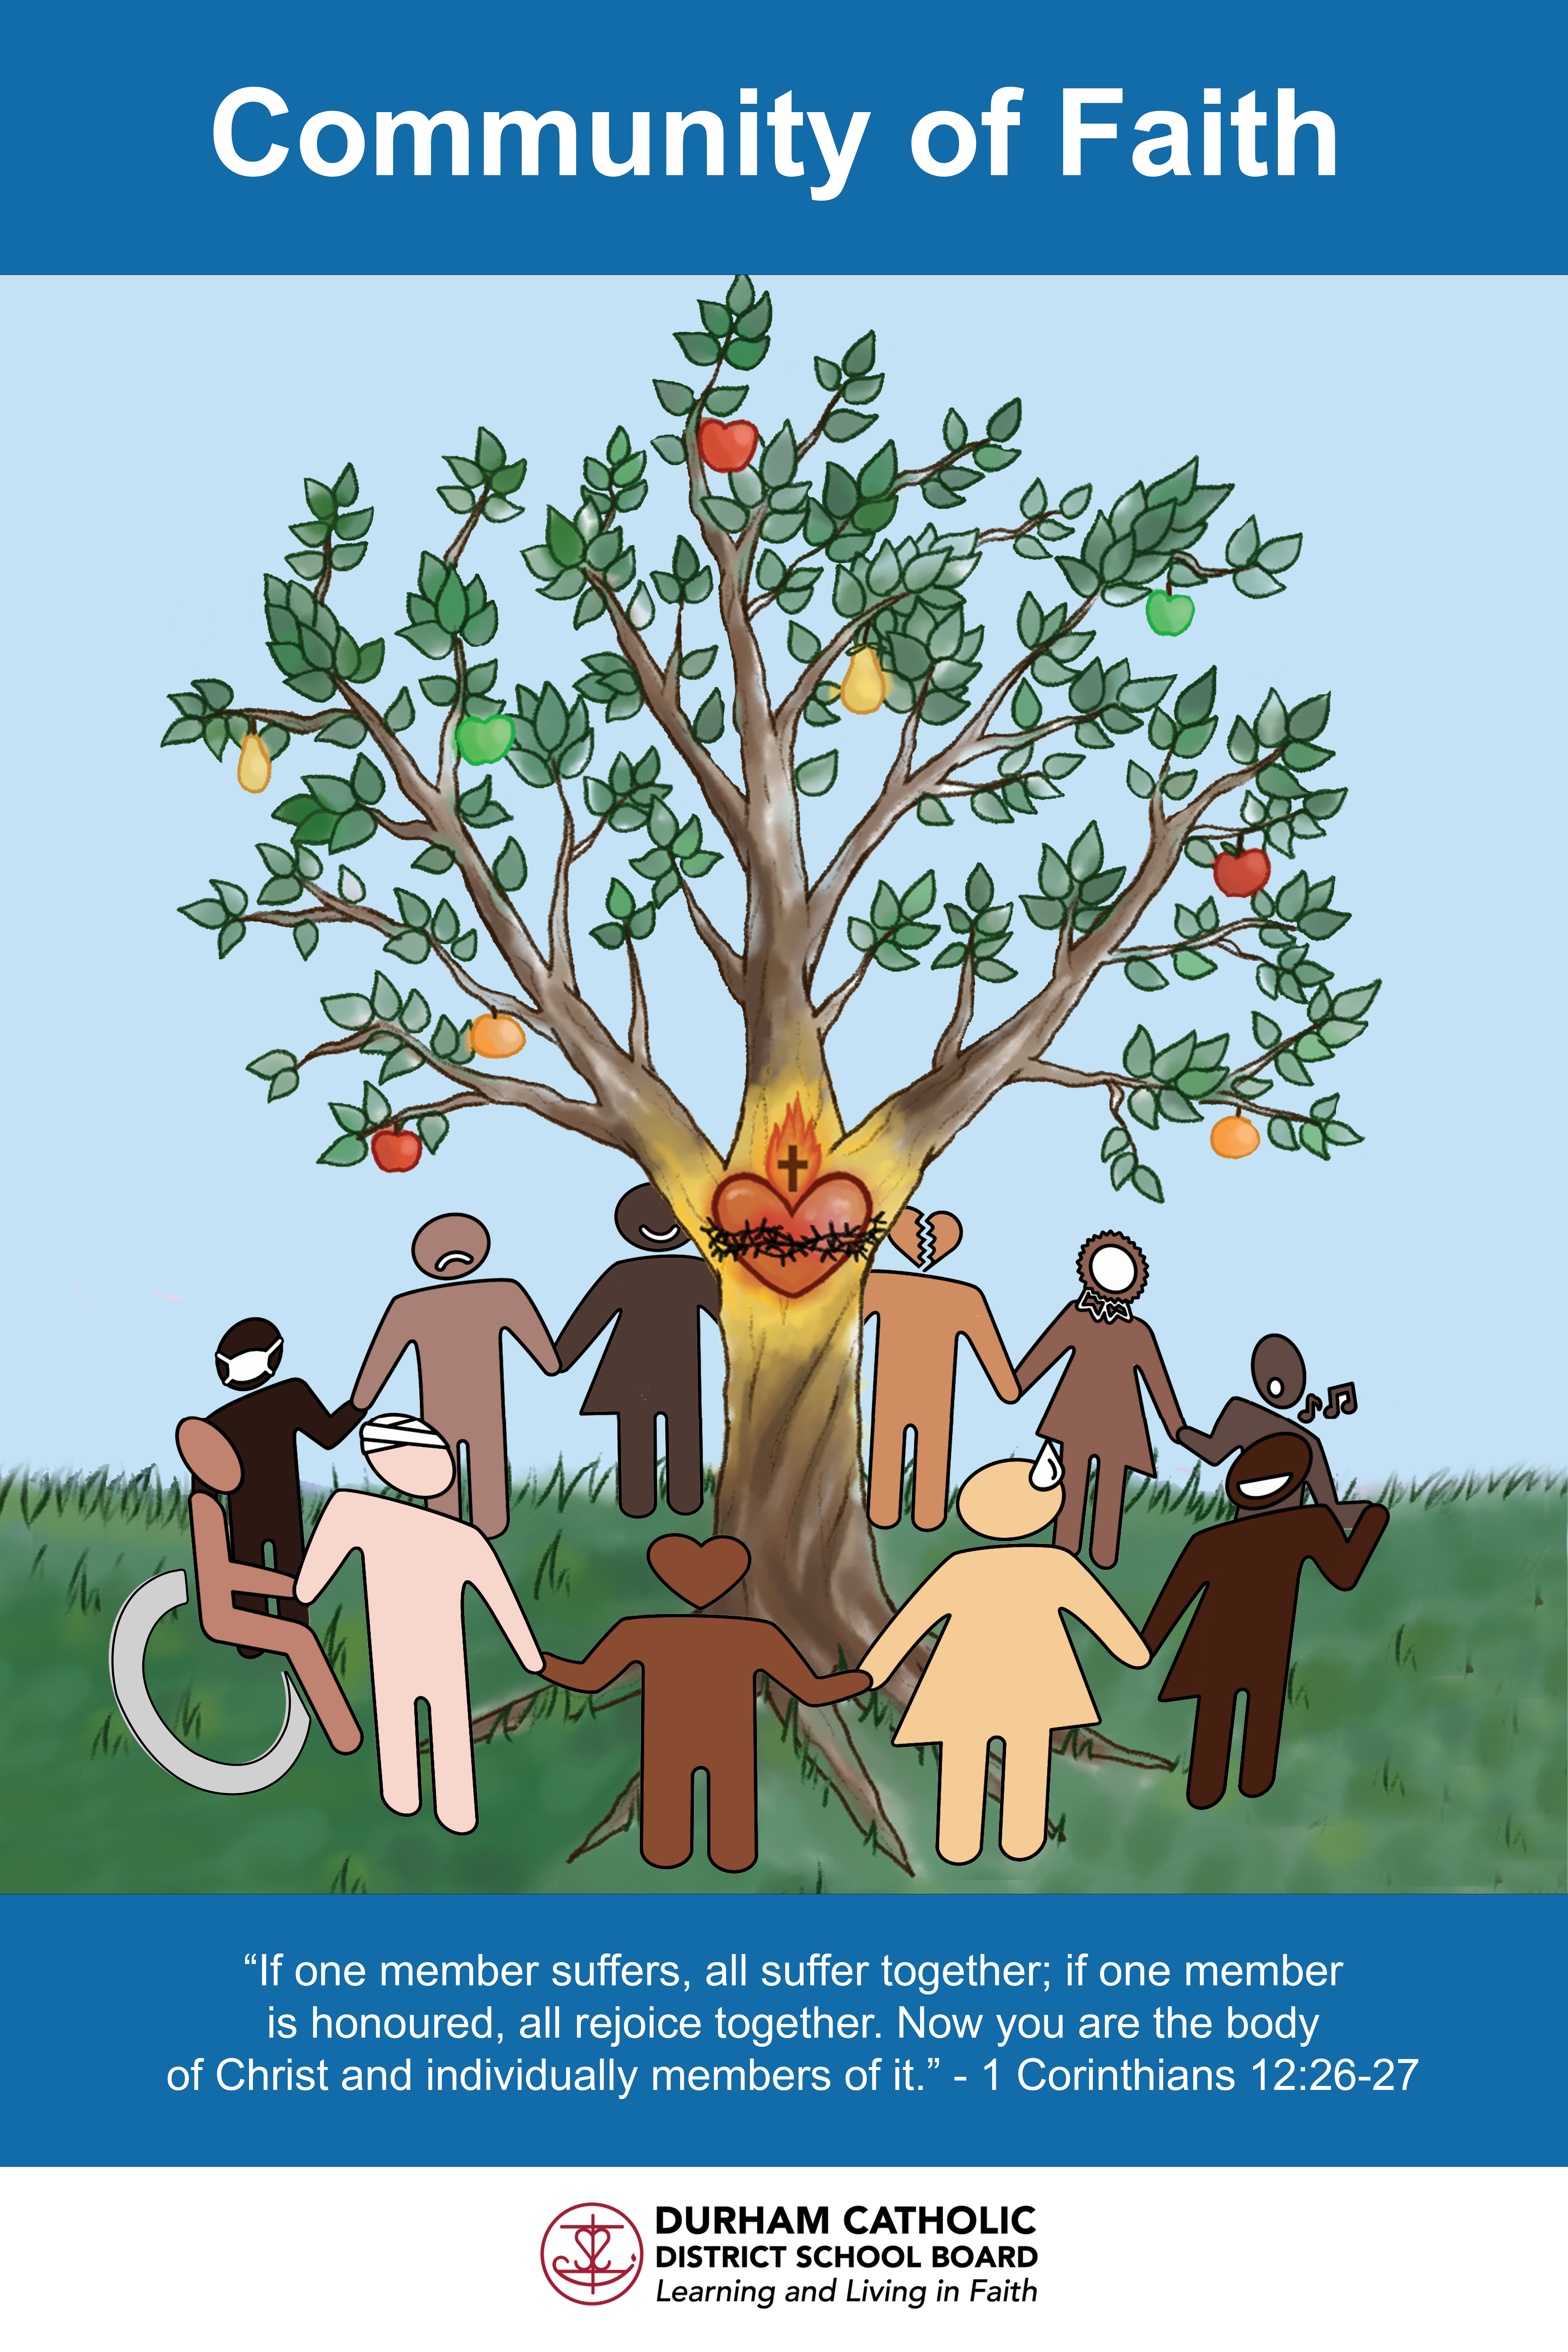 Tree with fruit and people surrounding the tree holding hands